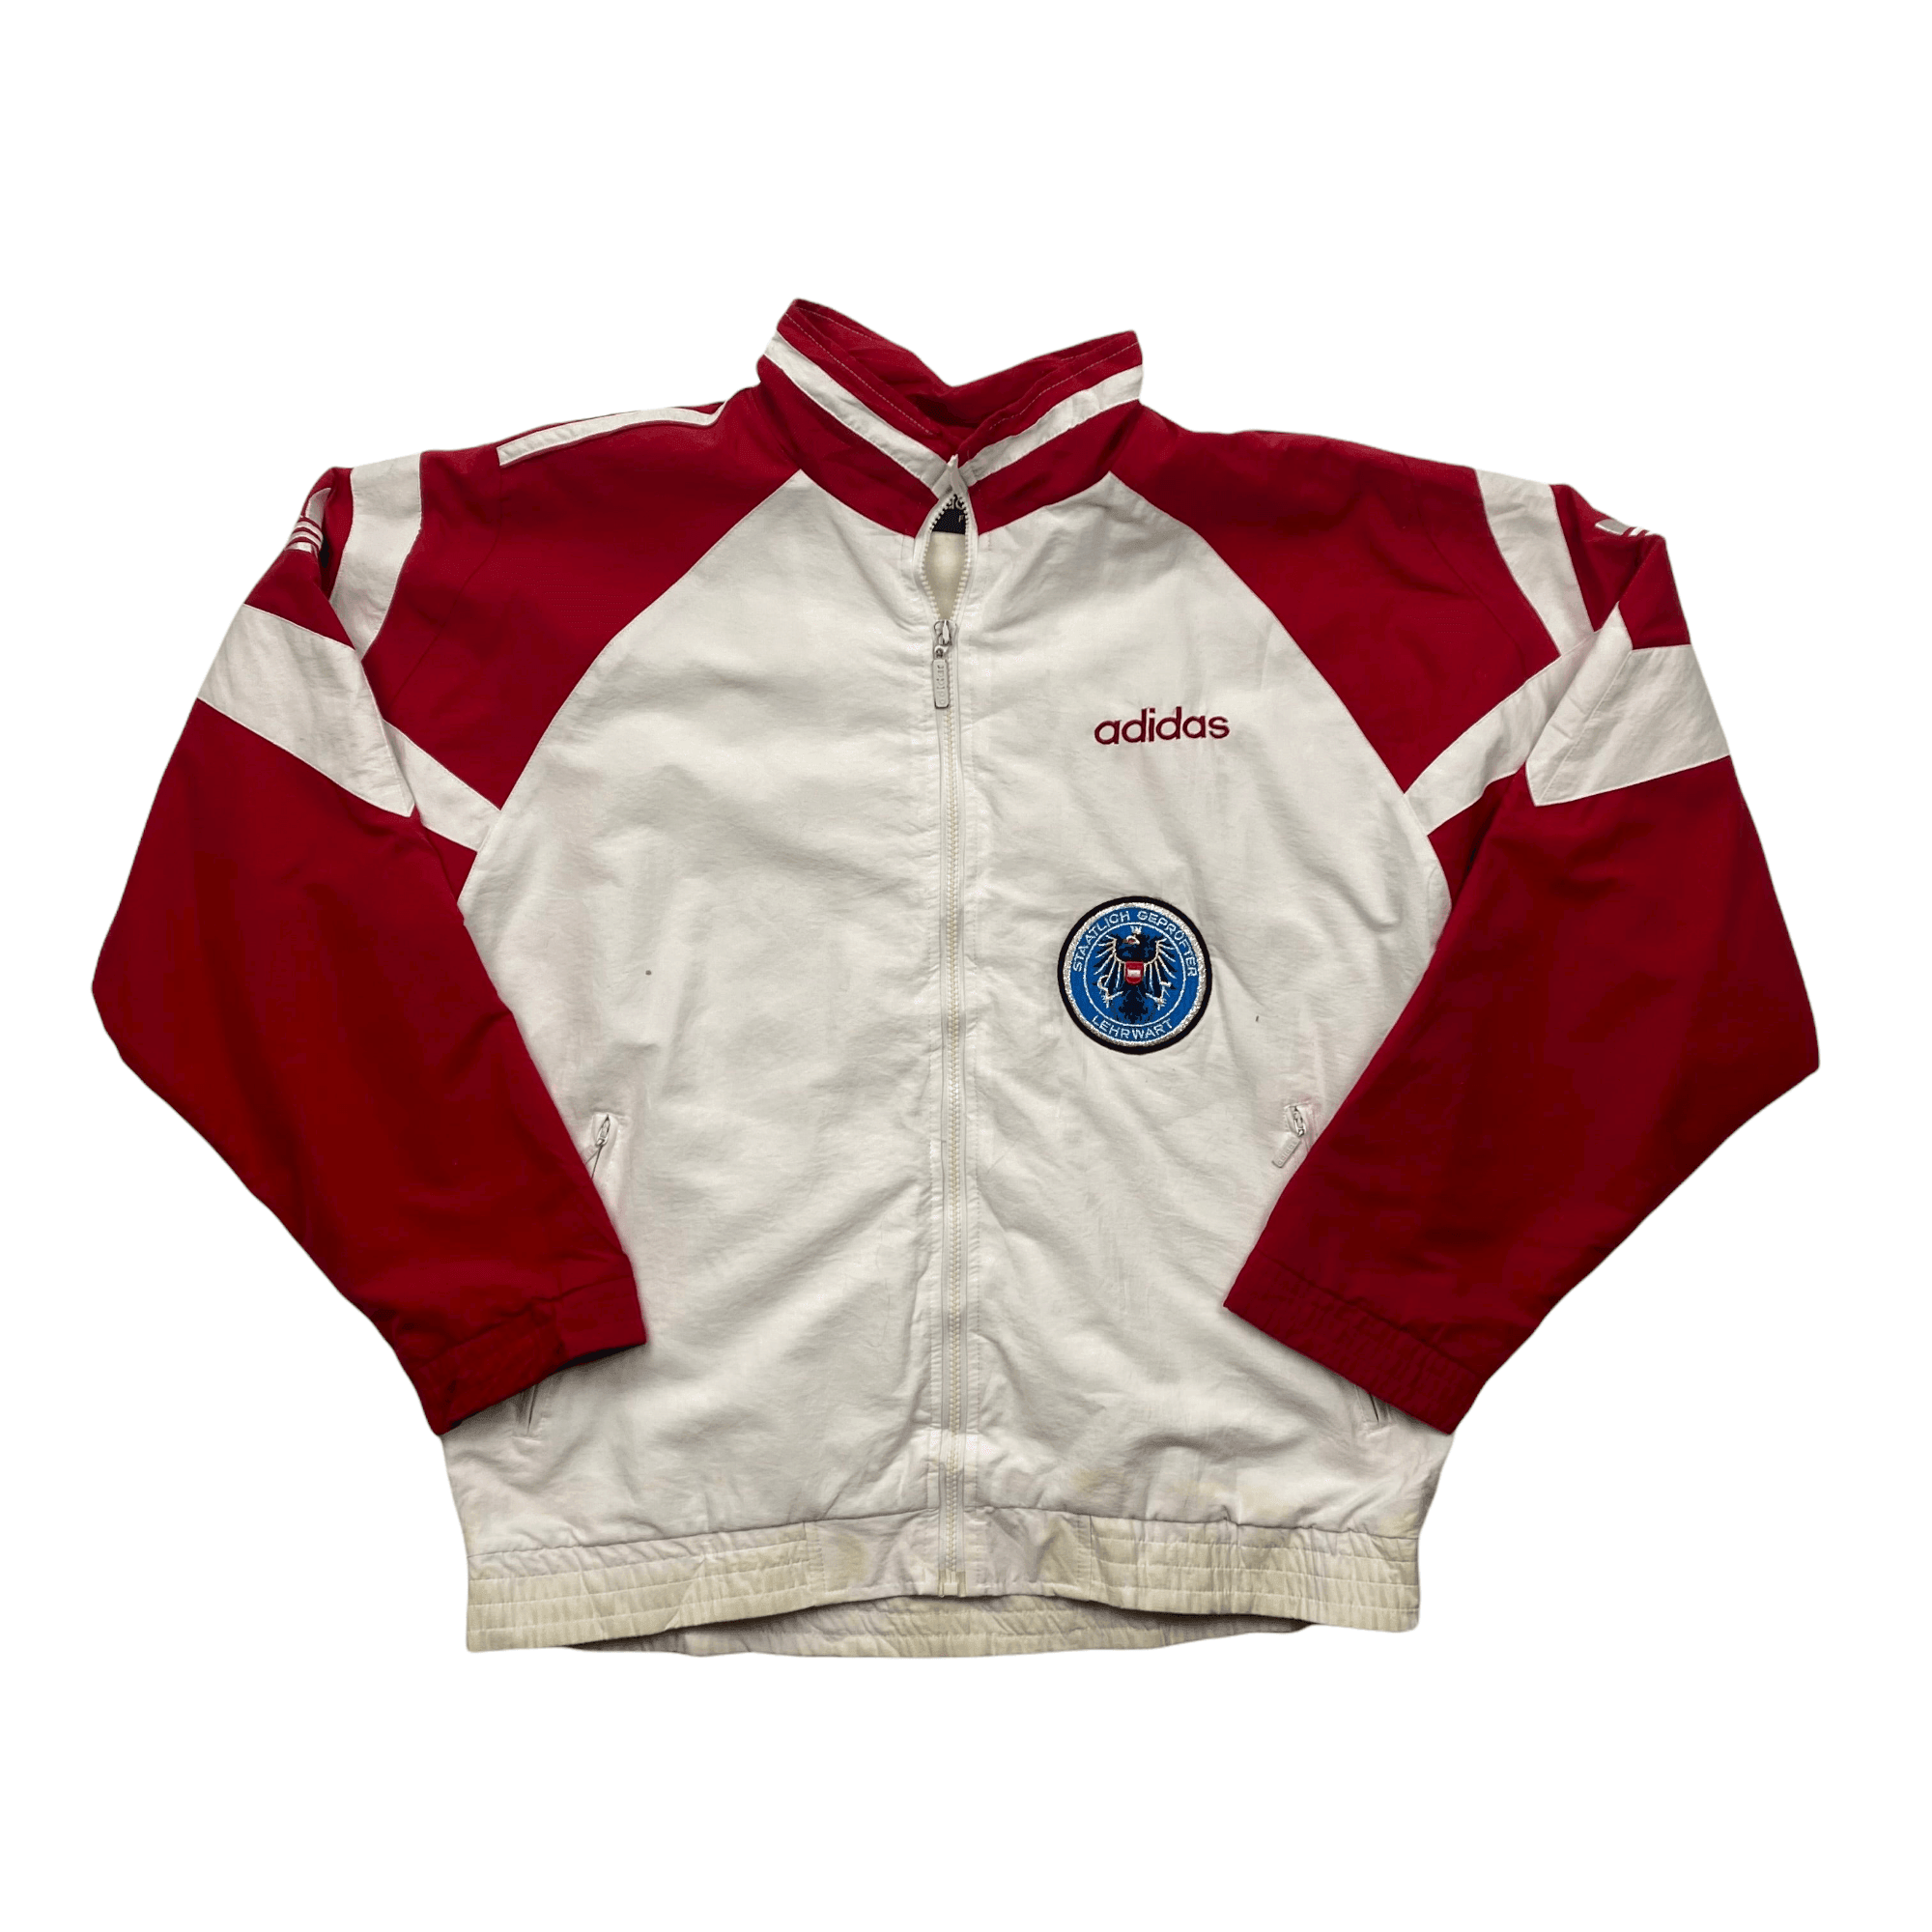 Vintage 90s White + Red Adidas Spell-Out Jacket - Large